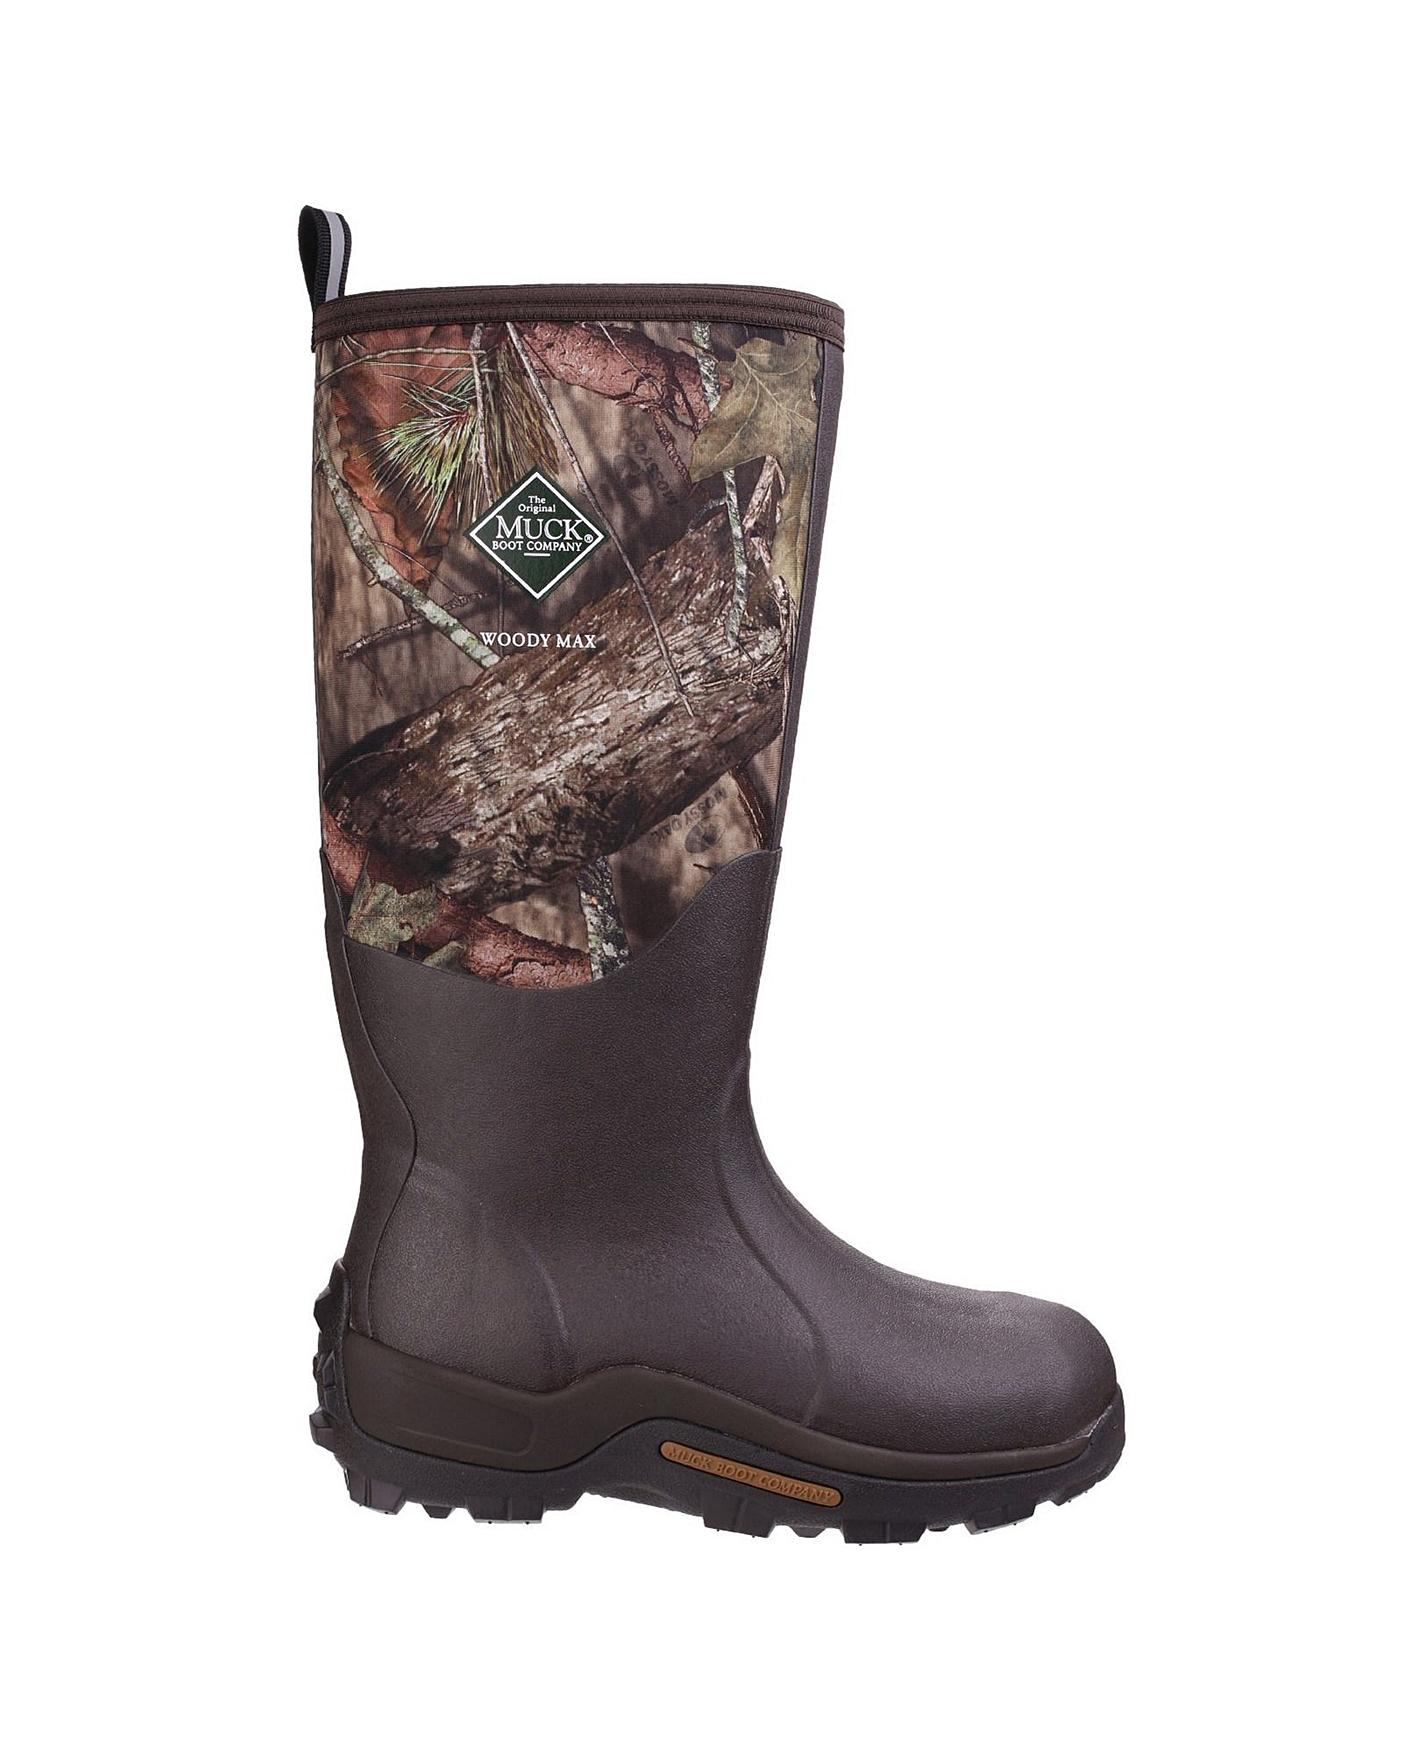 muck woody max cold weather hunting boot